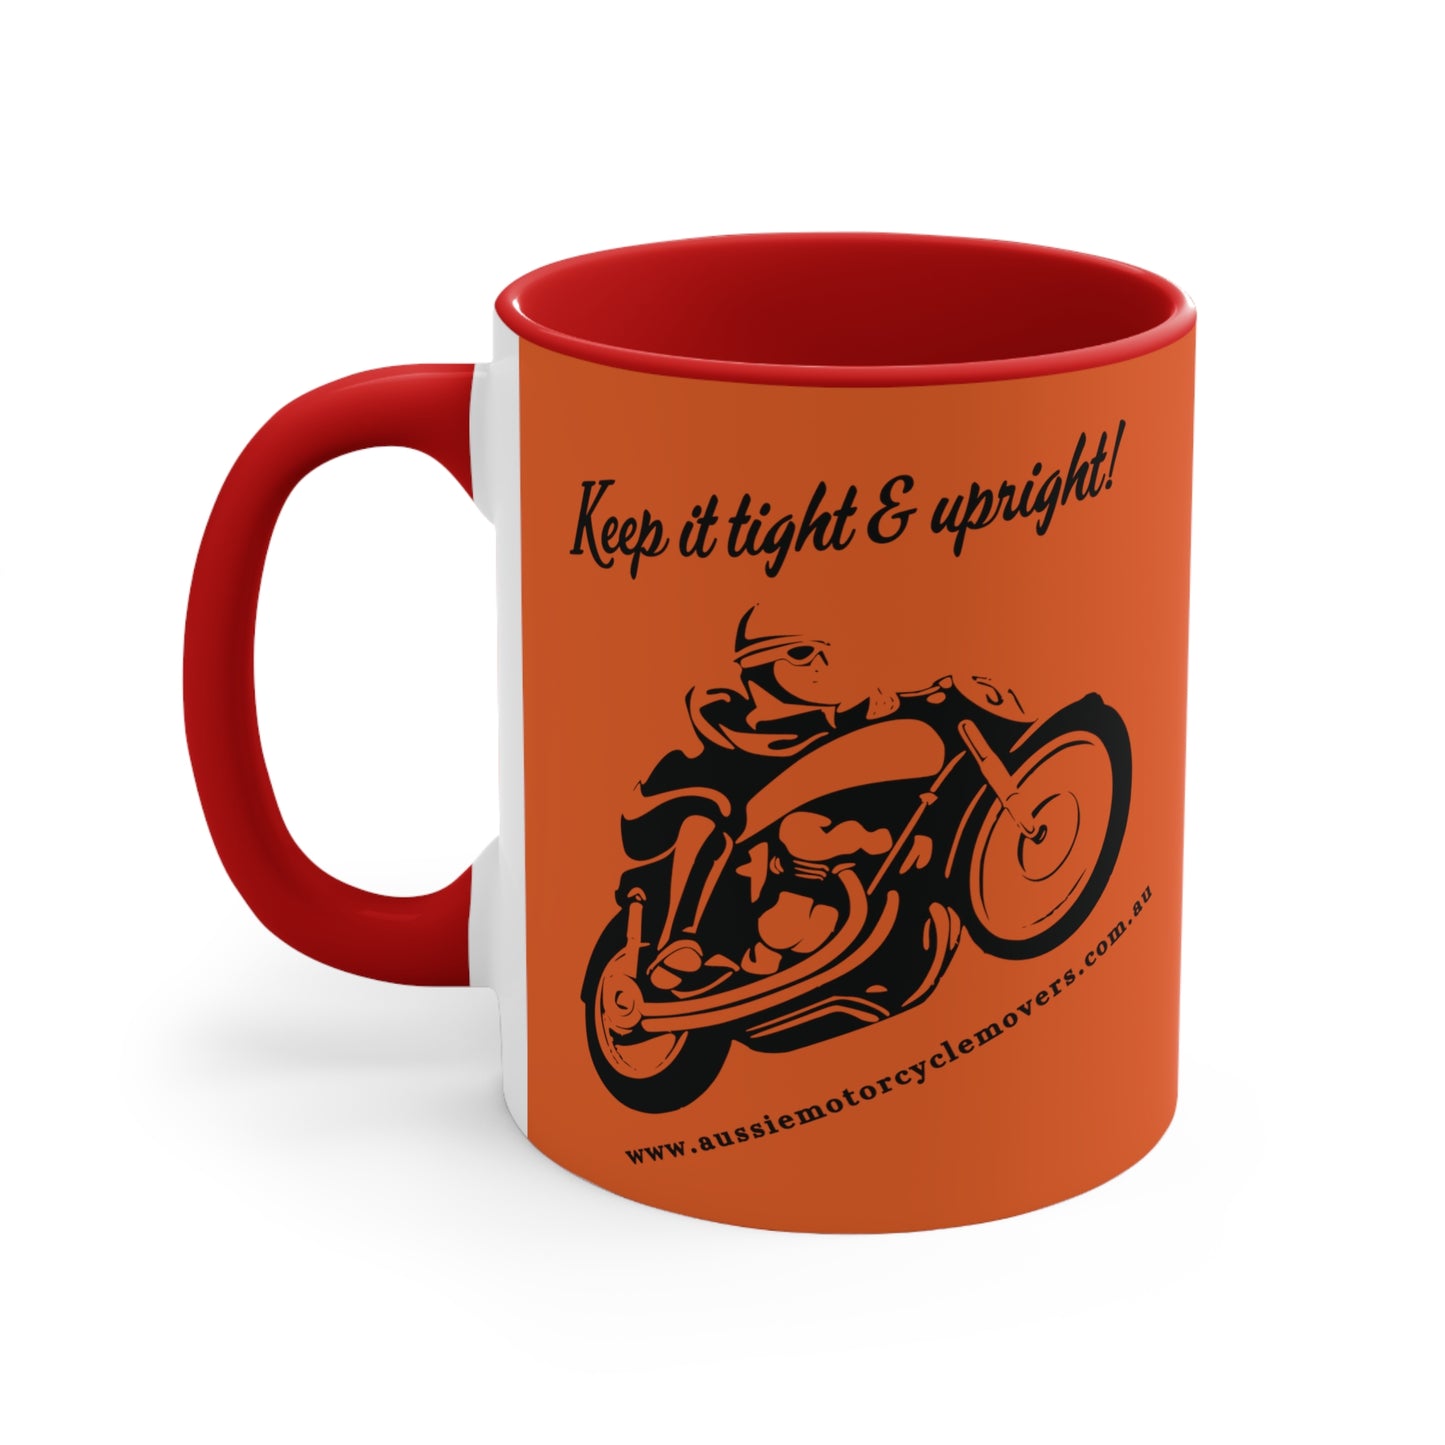 Aussie Motorcycle Movers Supporter Colorful Accent Mugs, 11oz, Mick Train legendary saying mug Mug   